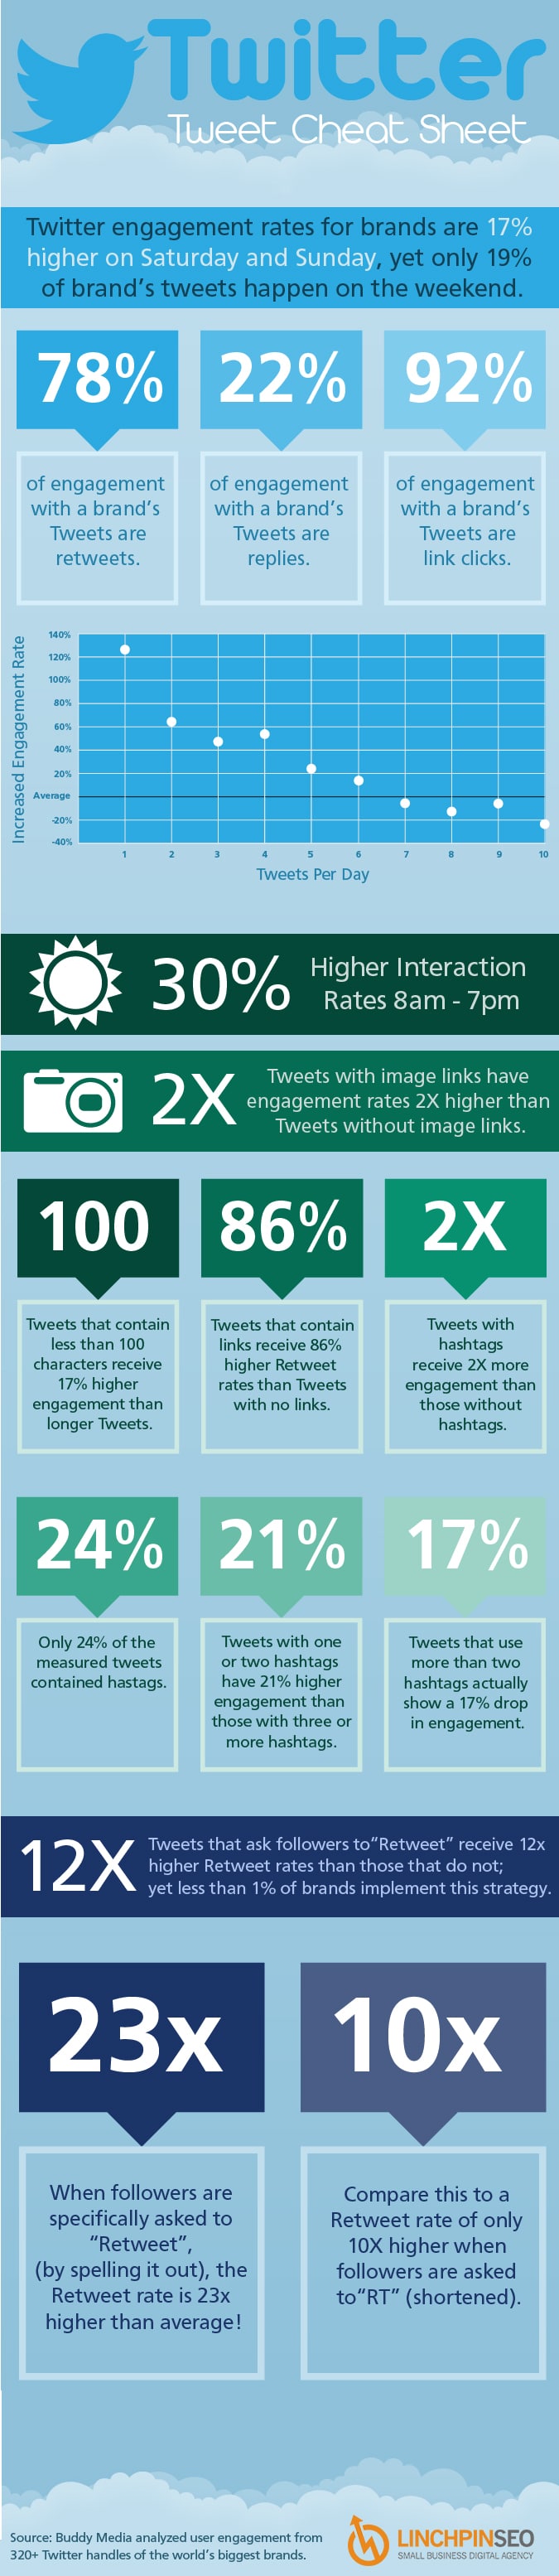 Guide For Increasing Twitter Engagement Rate For Brands [Infographic]